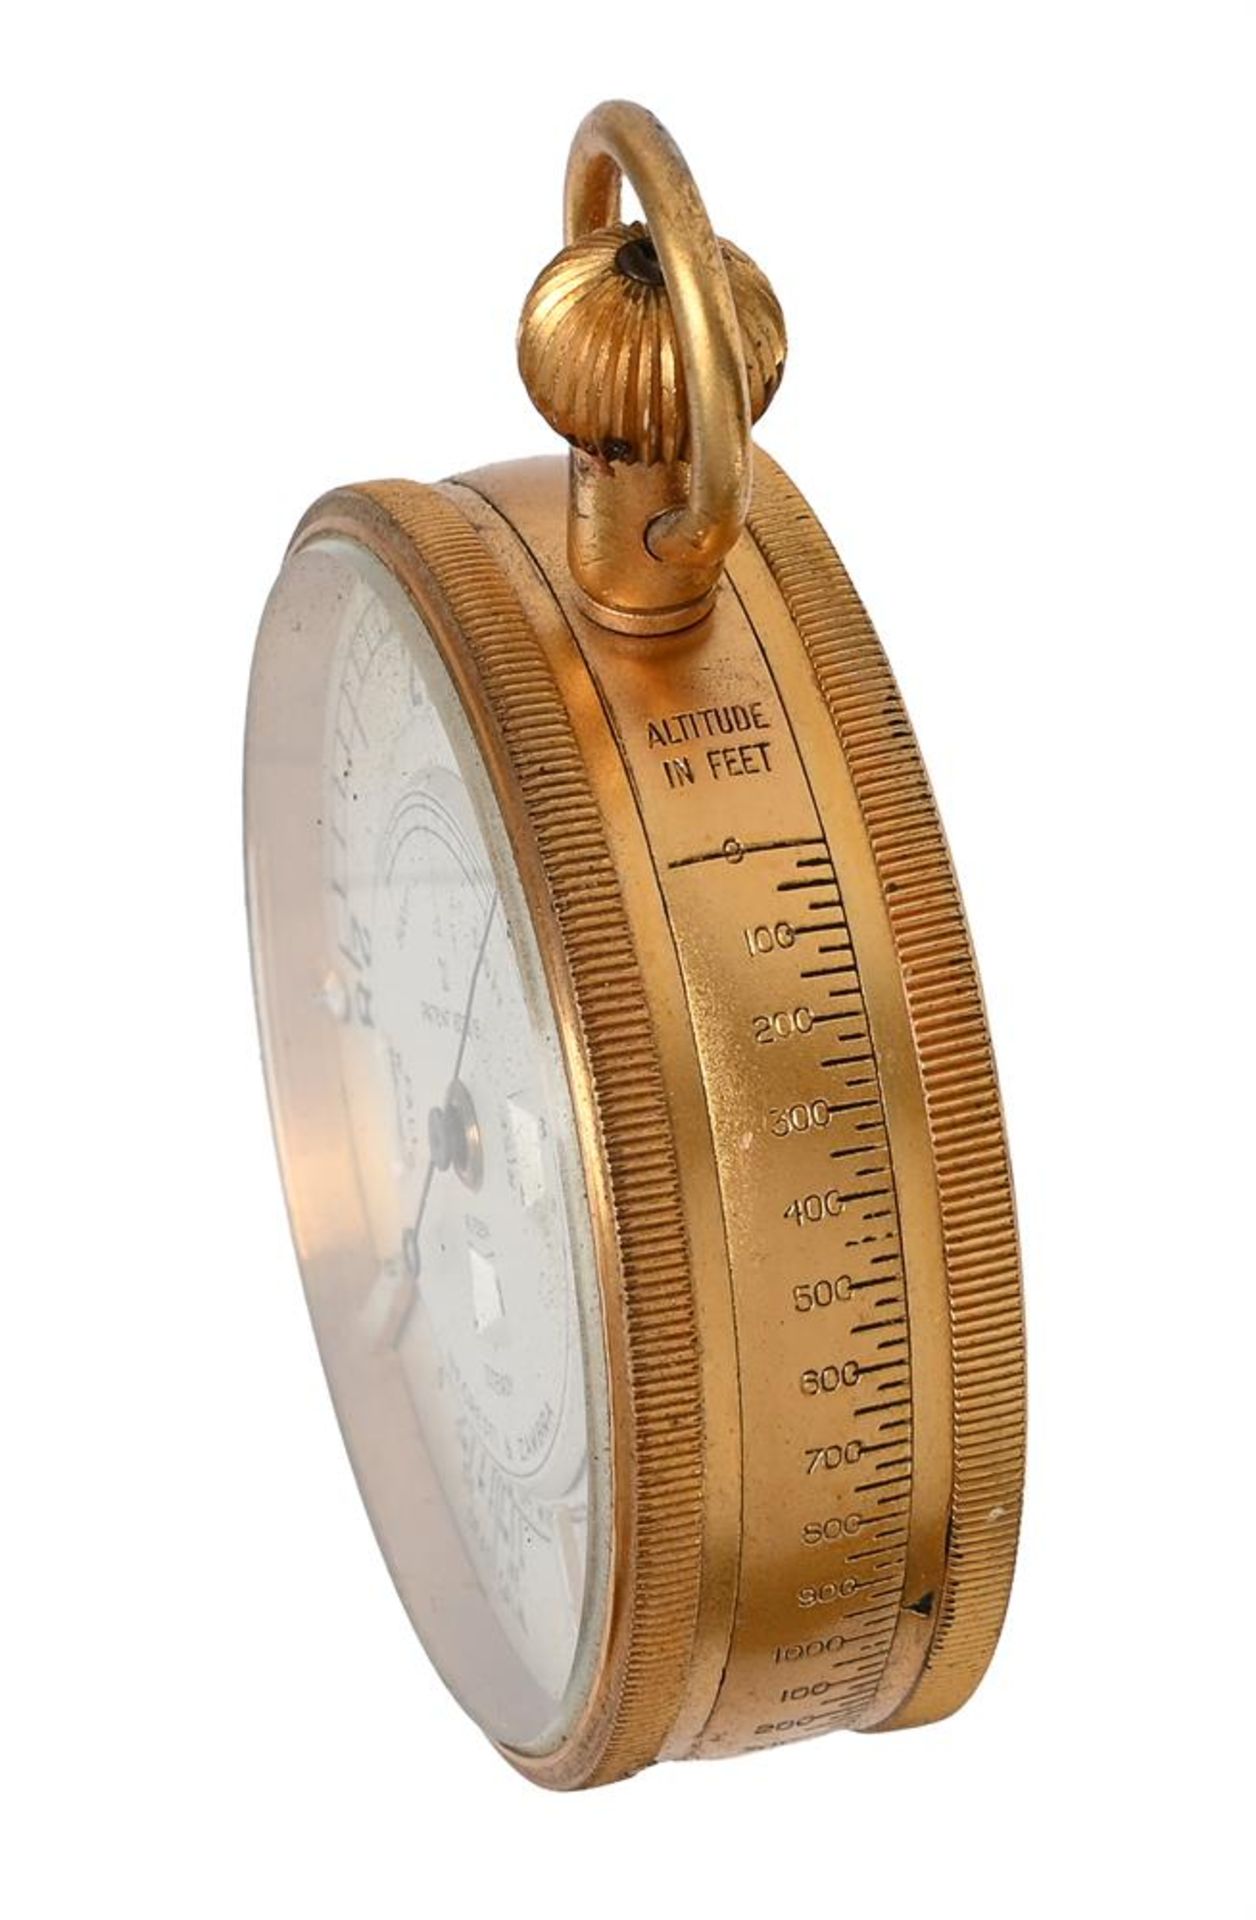 A GILT BRASS ANEROID POCKET WEATHER FORETELLER BOROMETER OR ‘WEATHER WATCH’ - Image 3 of 5